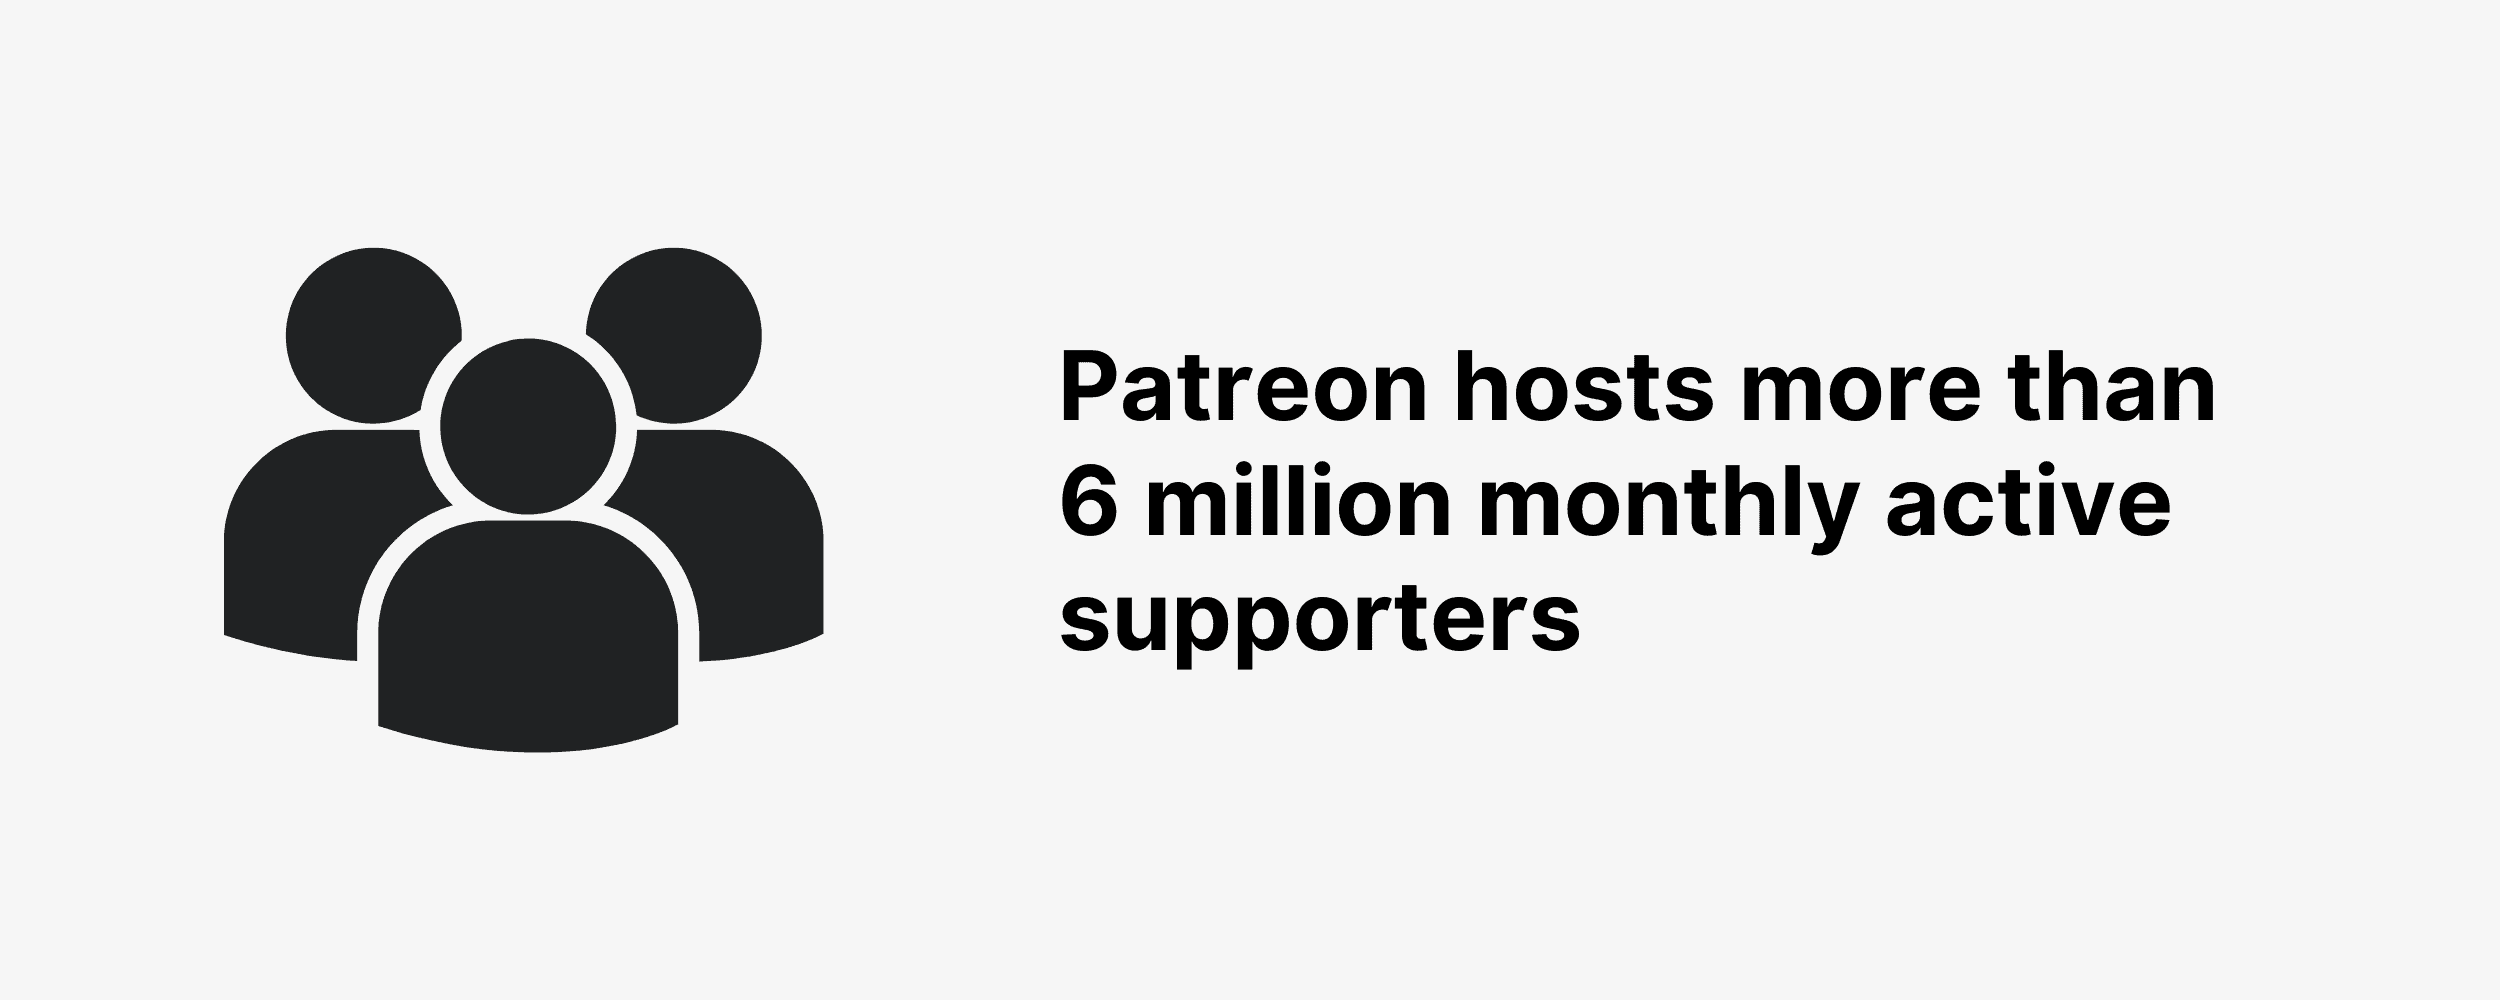 Patreon hosts more than 6 million monthly active supporters